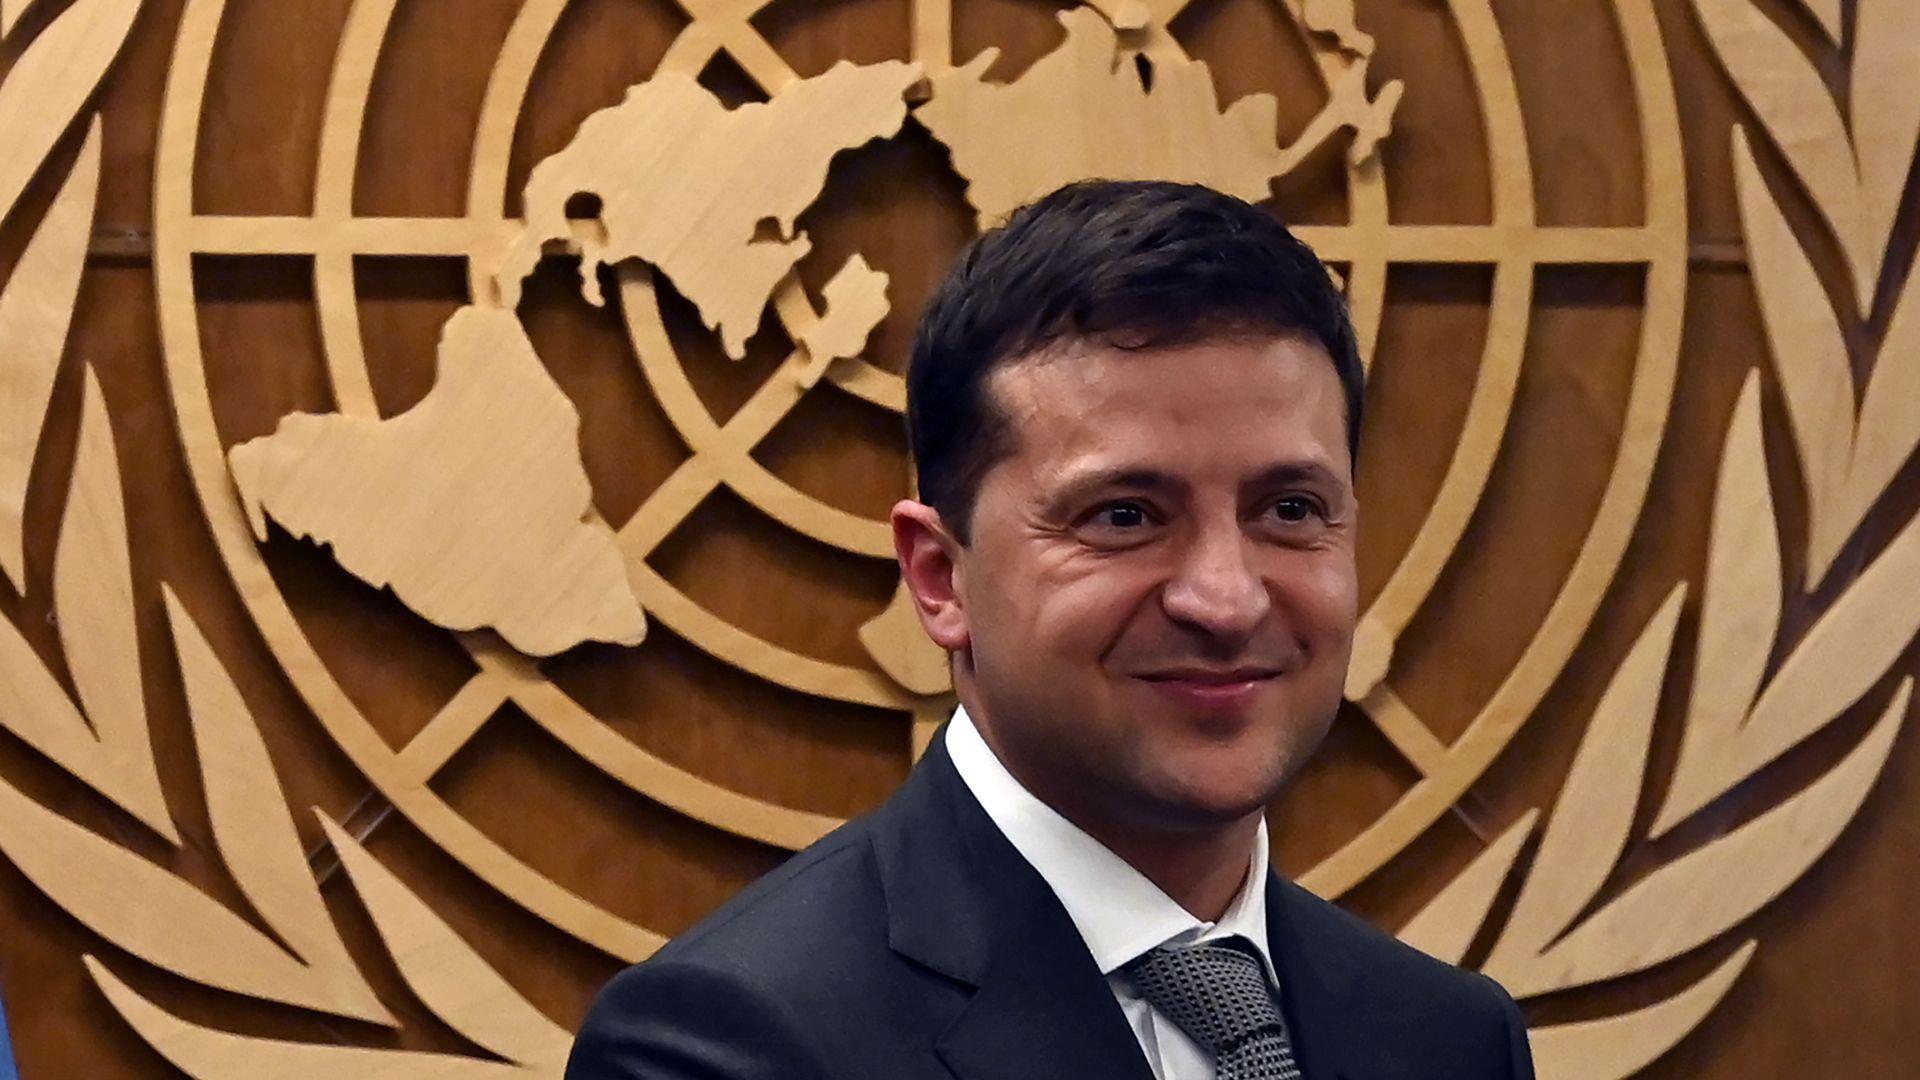 Zelensky in front of a wall-mounted UN logo